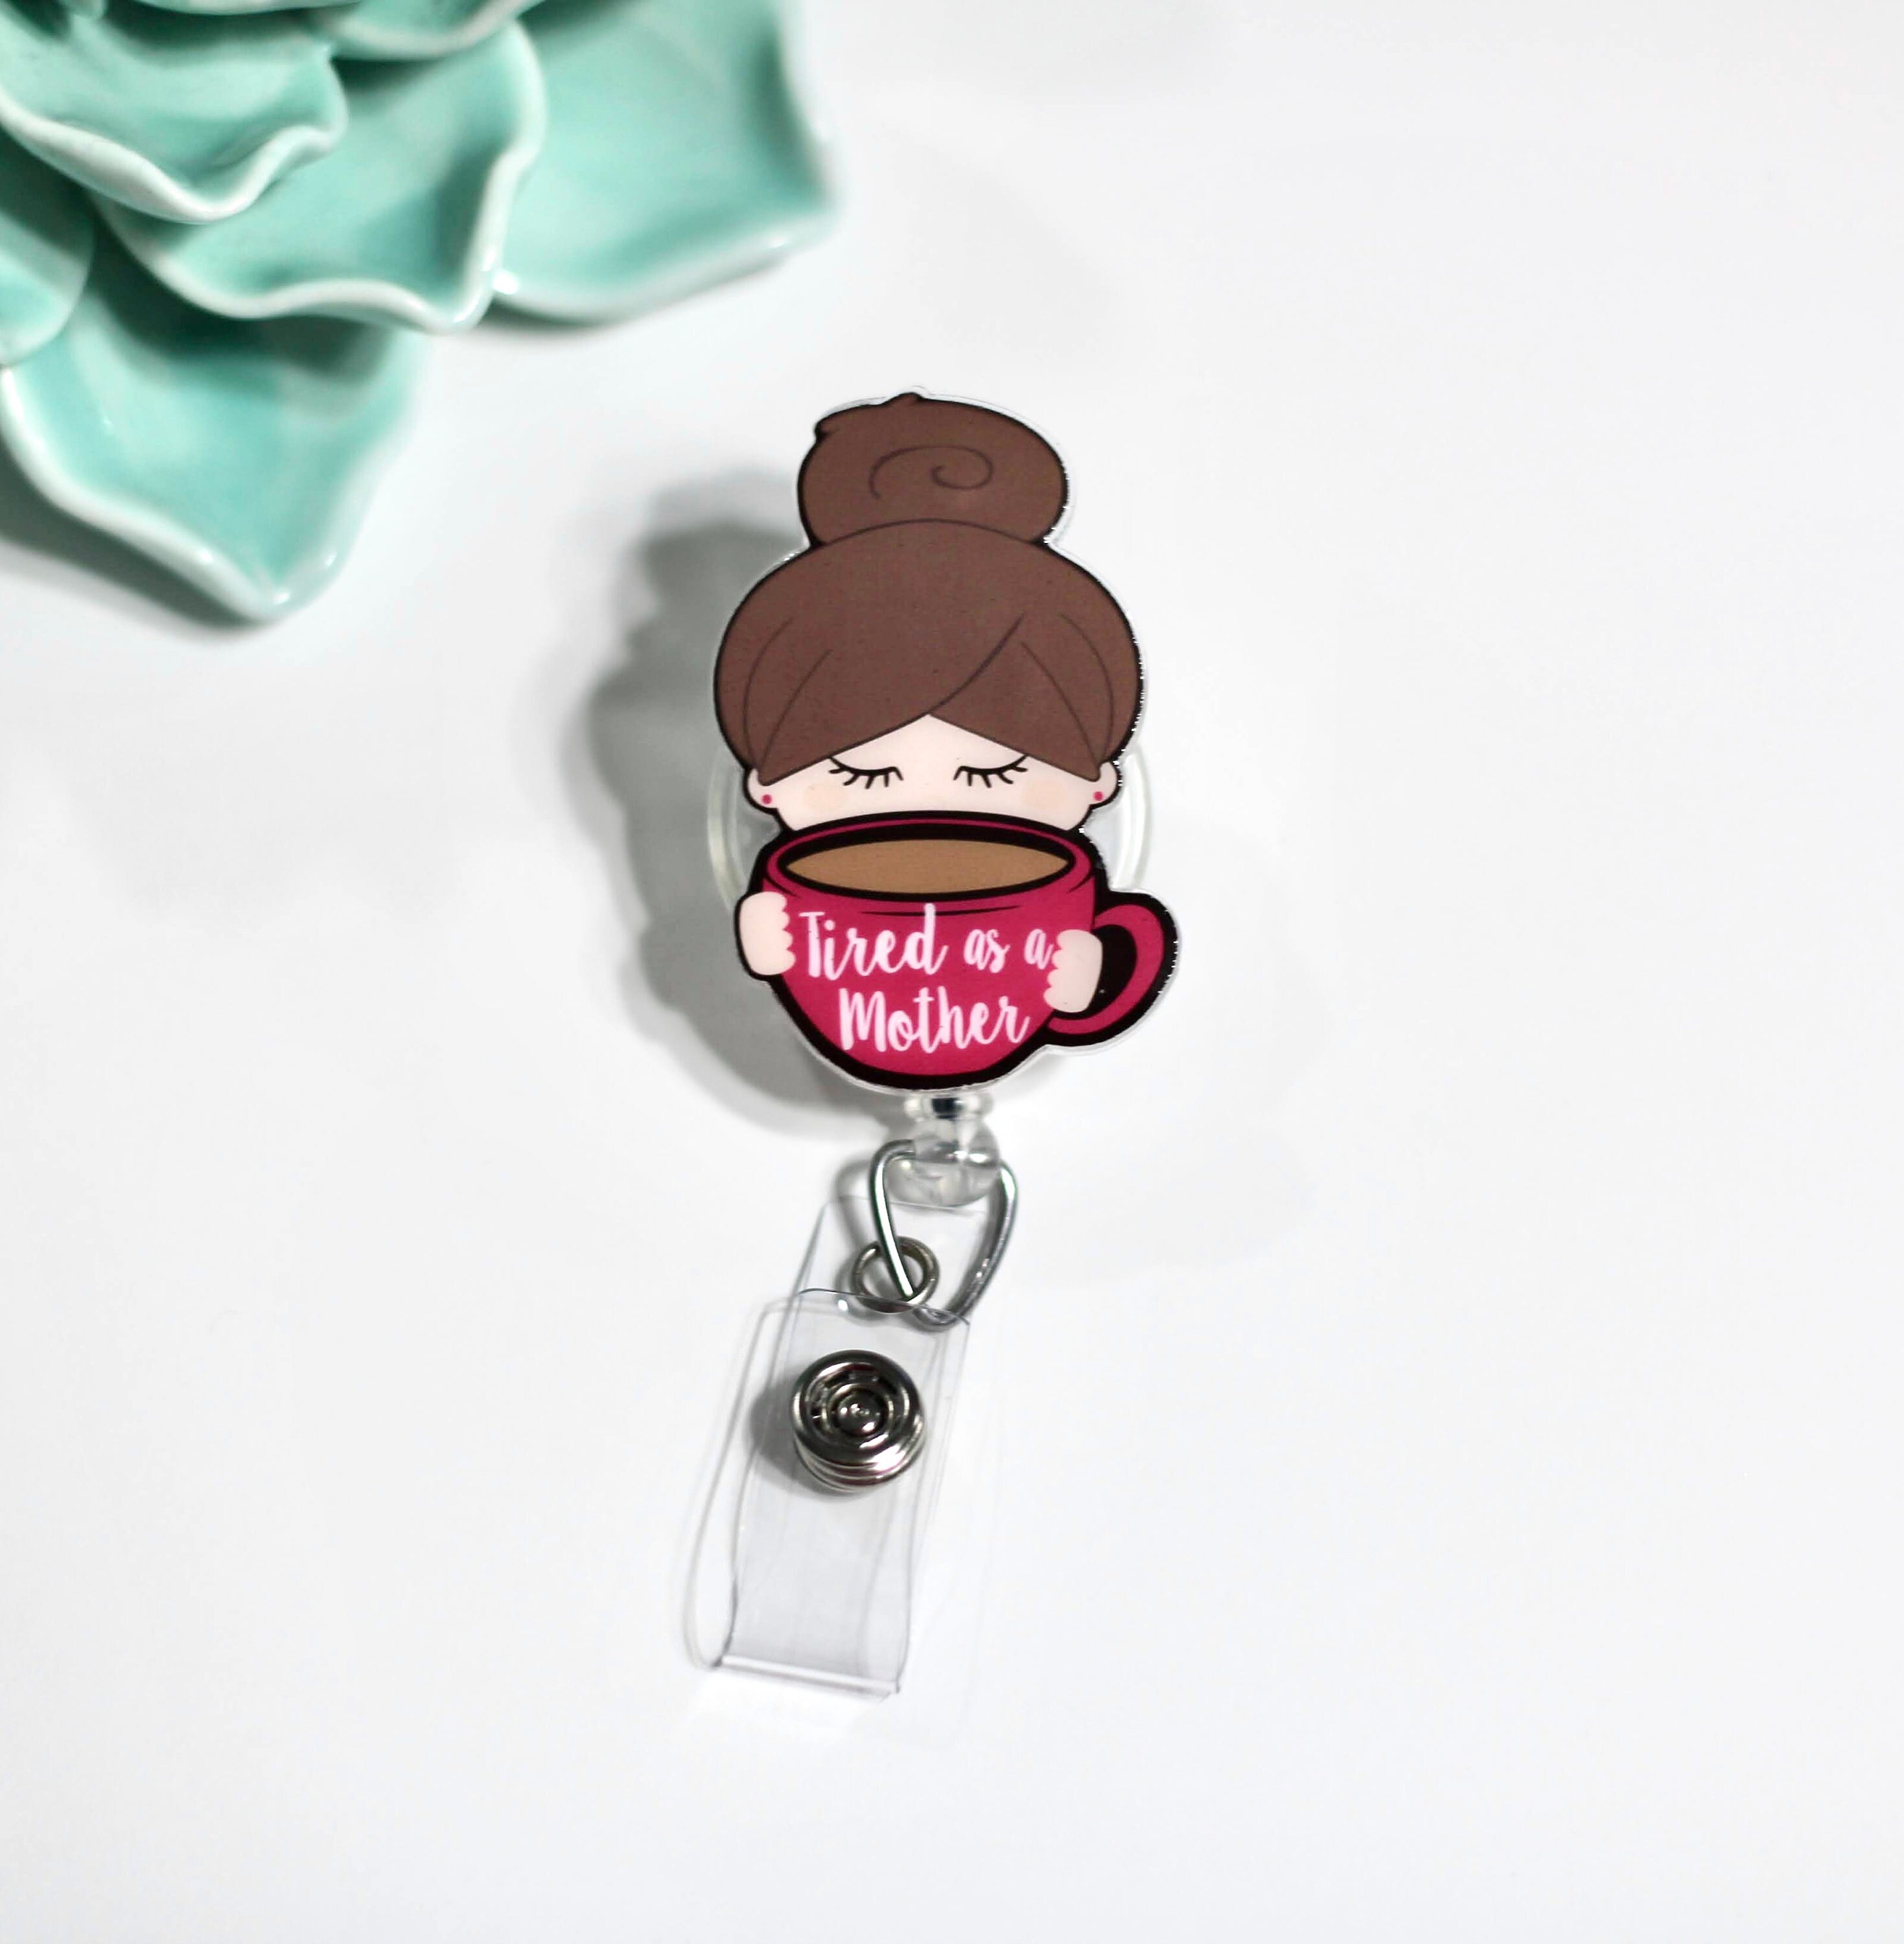 Tired As A Mother Badge Reel - Mom Drinking Coffee - Mom Life - Glitter - Medical Key Card - Nurses Gift - Office Staff Gift 